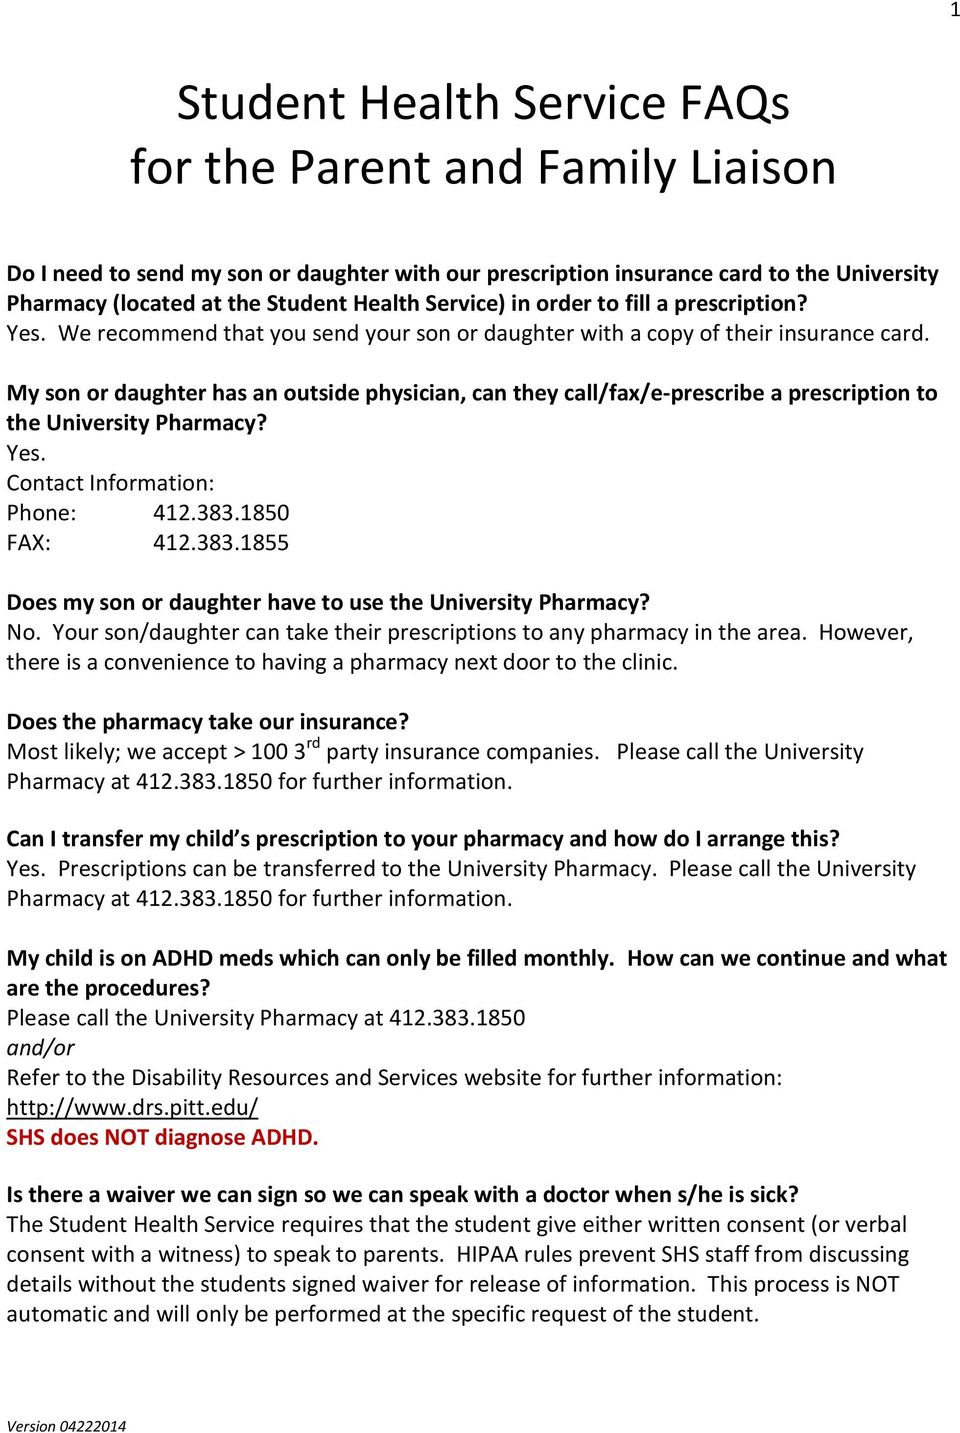 My son or daughter has an outside physician, can they call/fax/e-prescribe a prescription to the University Pharmacy? Yes. Contact Information: Phone: 412.383.